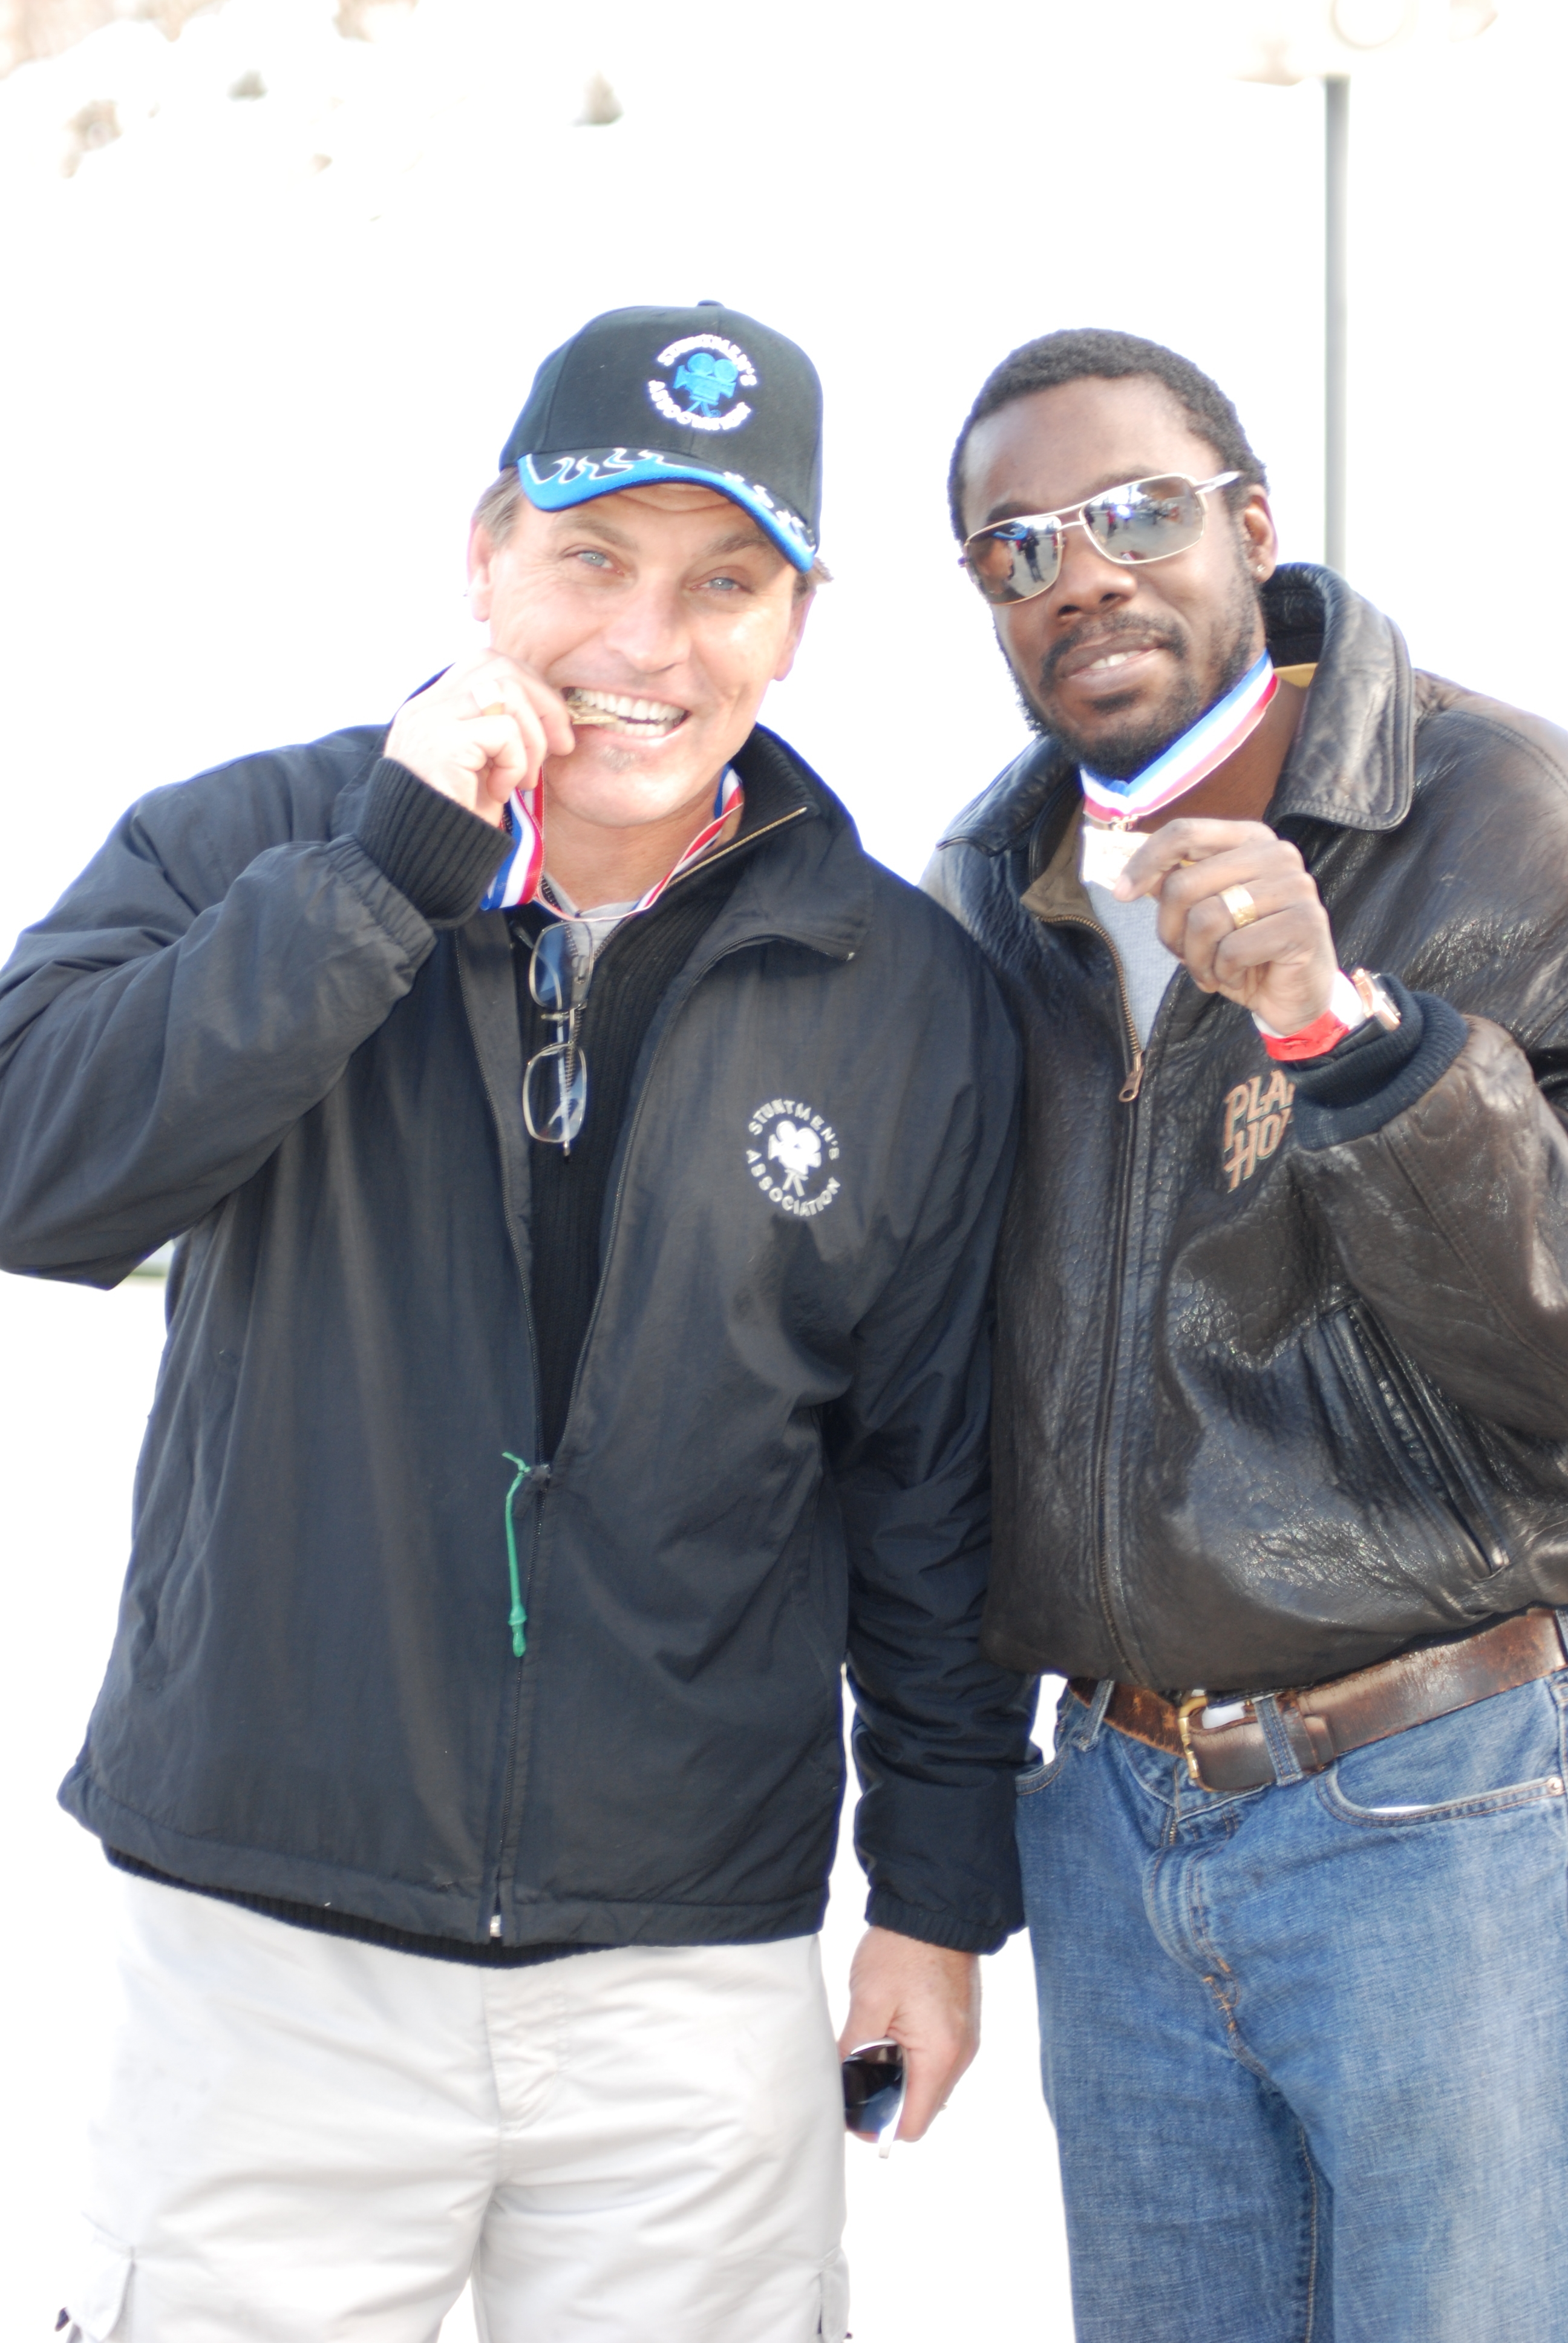 Eddie & Doug-e-Doug ride the Olypic bobsled in Park City